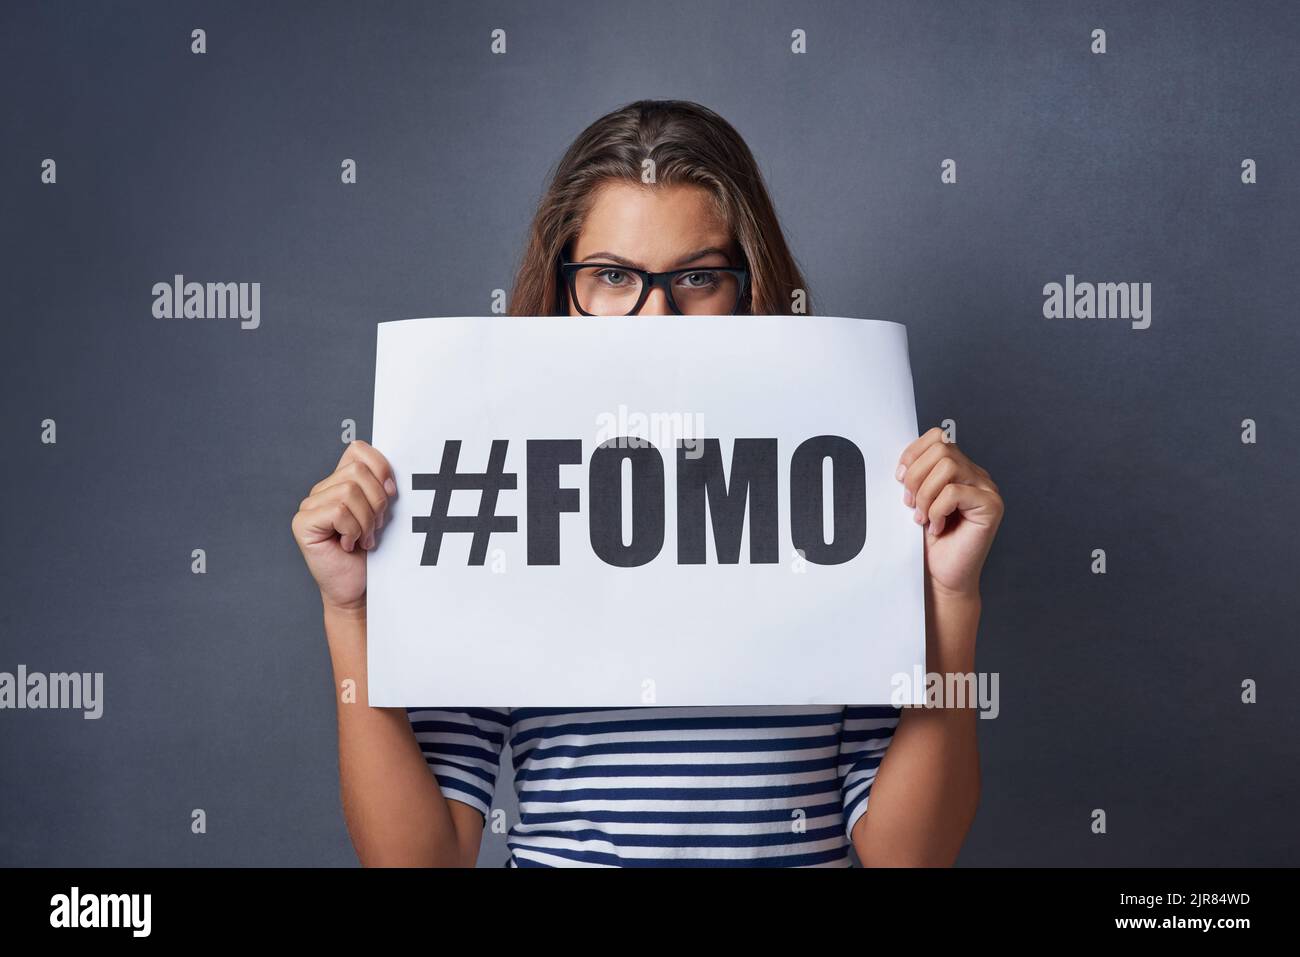 If its happening I want to be part of it. Studio shot of an attractive young woman holding a sign with FOMO printed on it against a gray background. Stock Photo